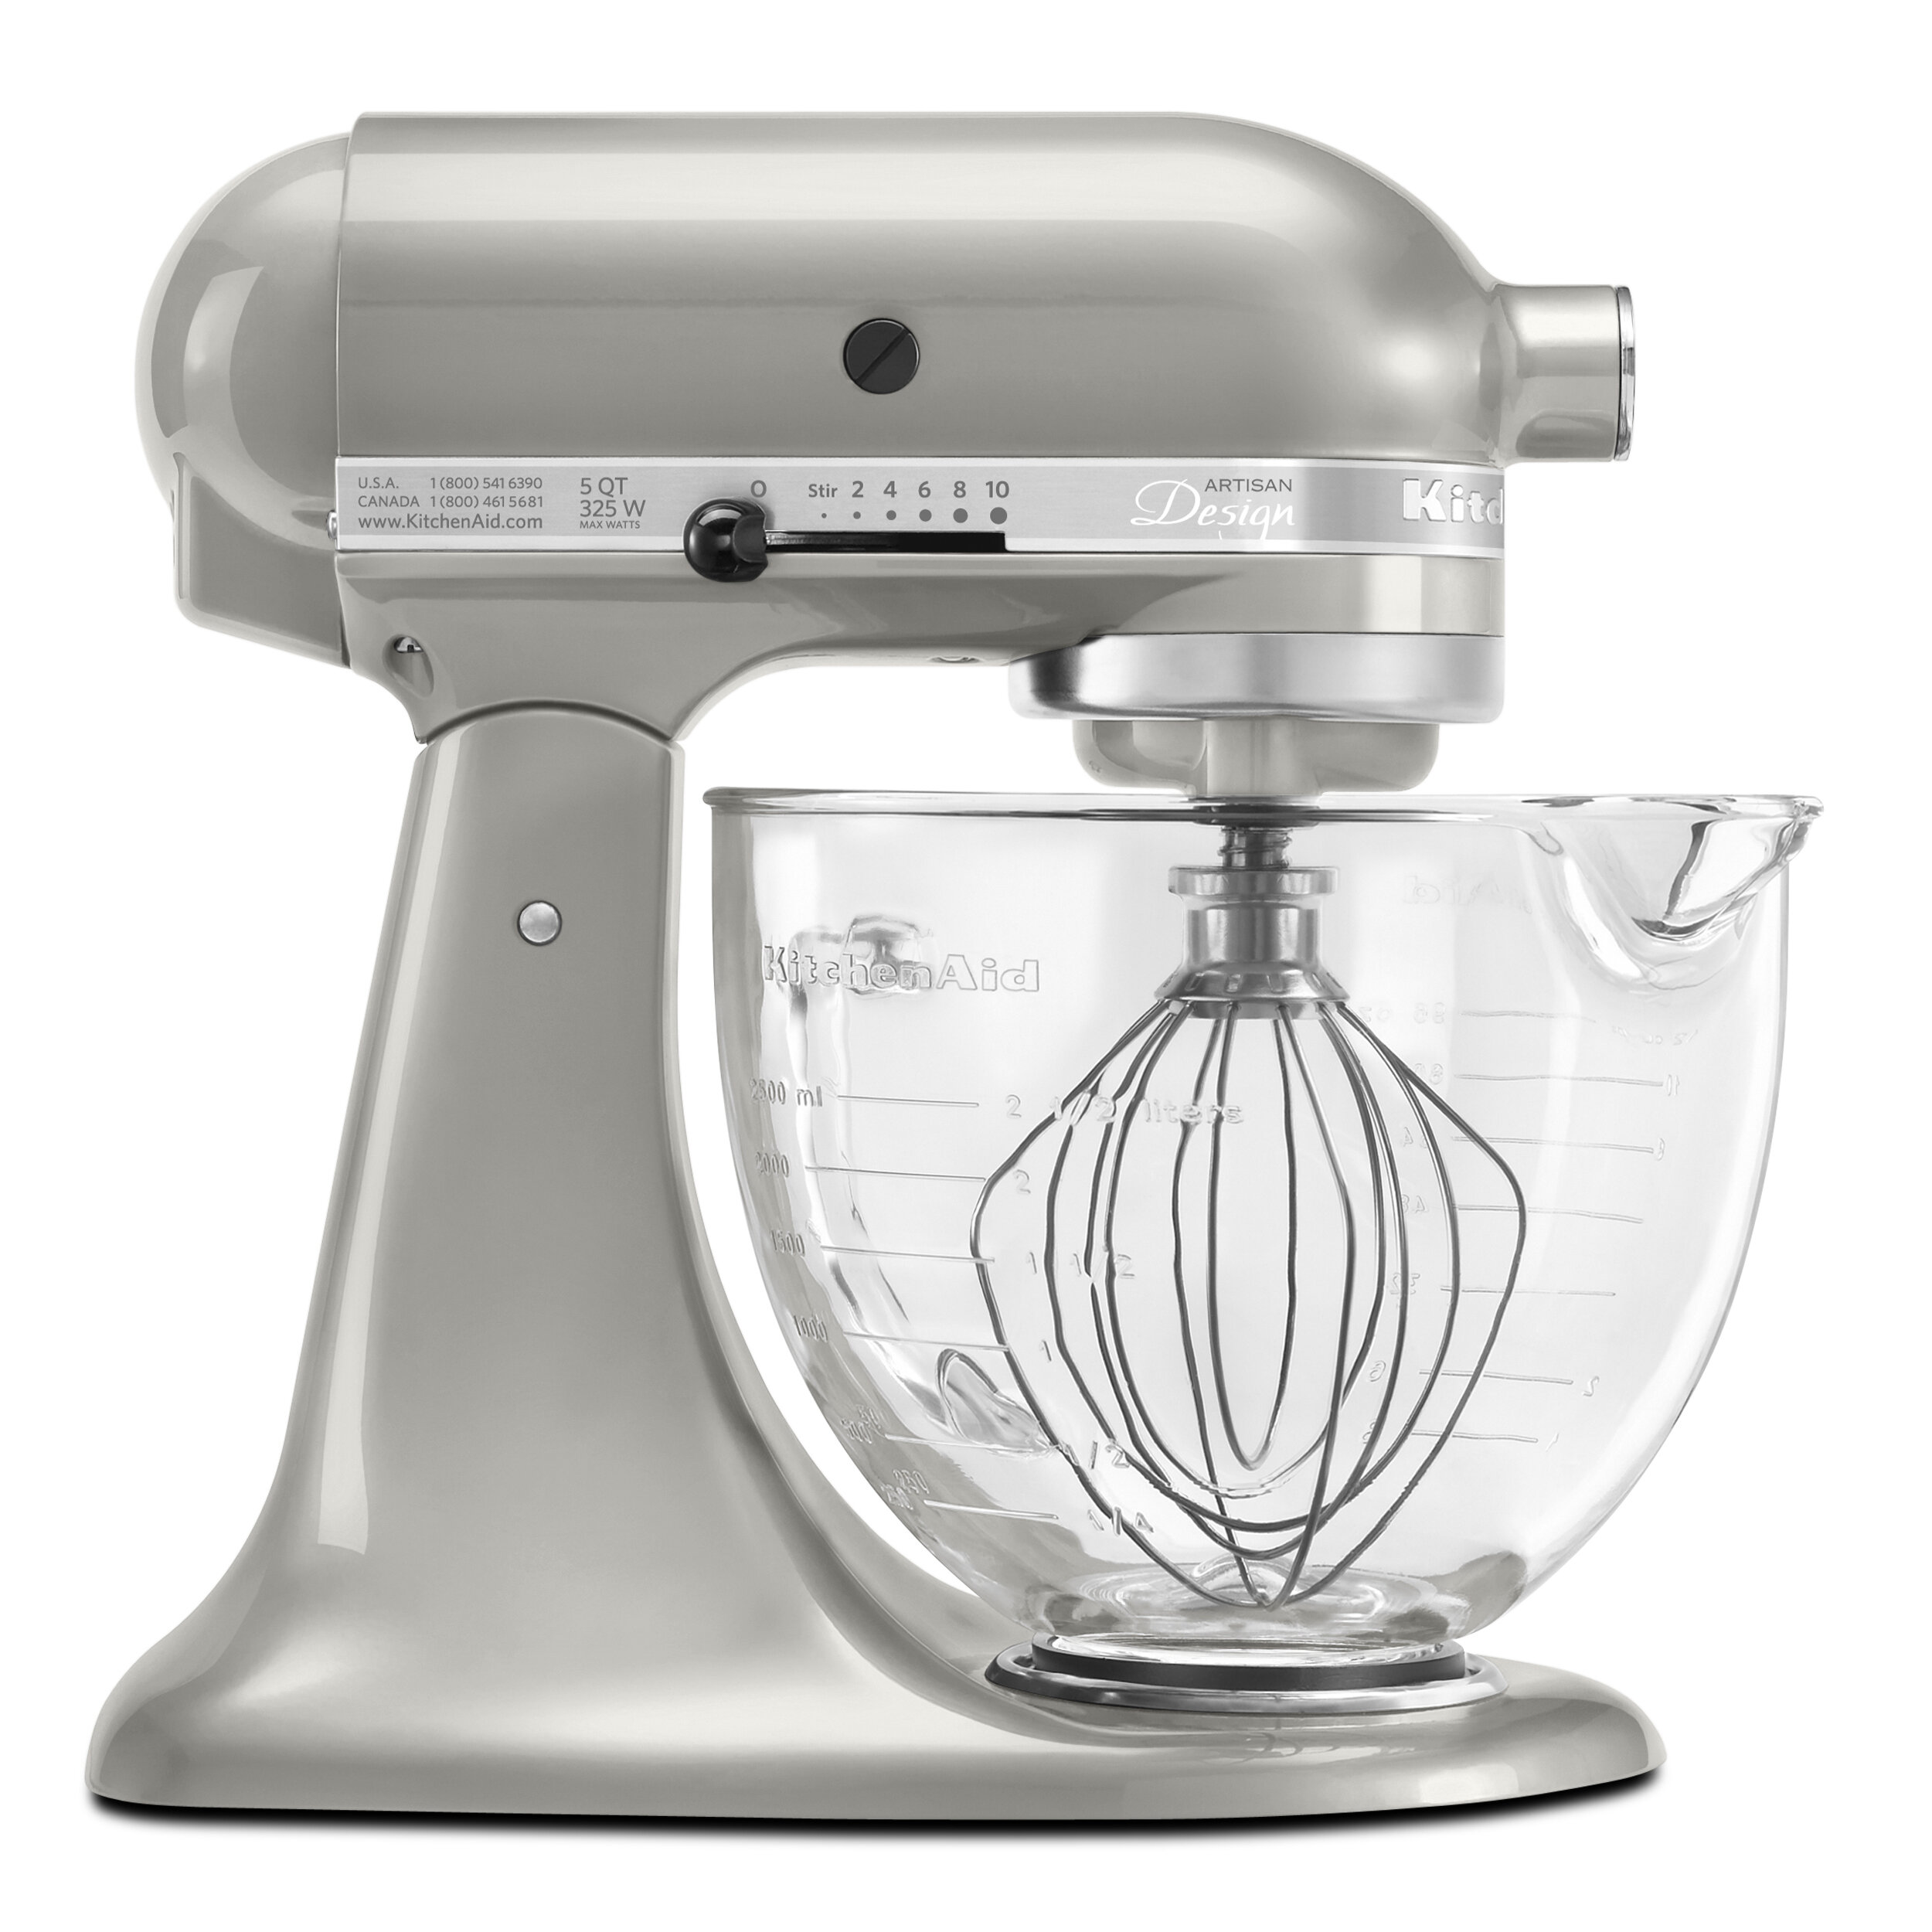 Kitchenaid Artisan Design Series 10 Speed 5 Qt Stand Mixer With Glass Bowl Includes Dough Hook Reviews Wayfair,Modern Single Story Office Building Designs